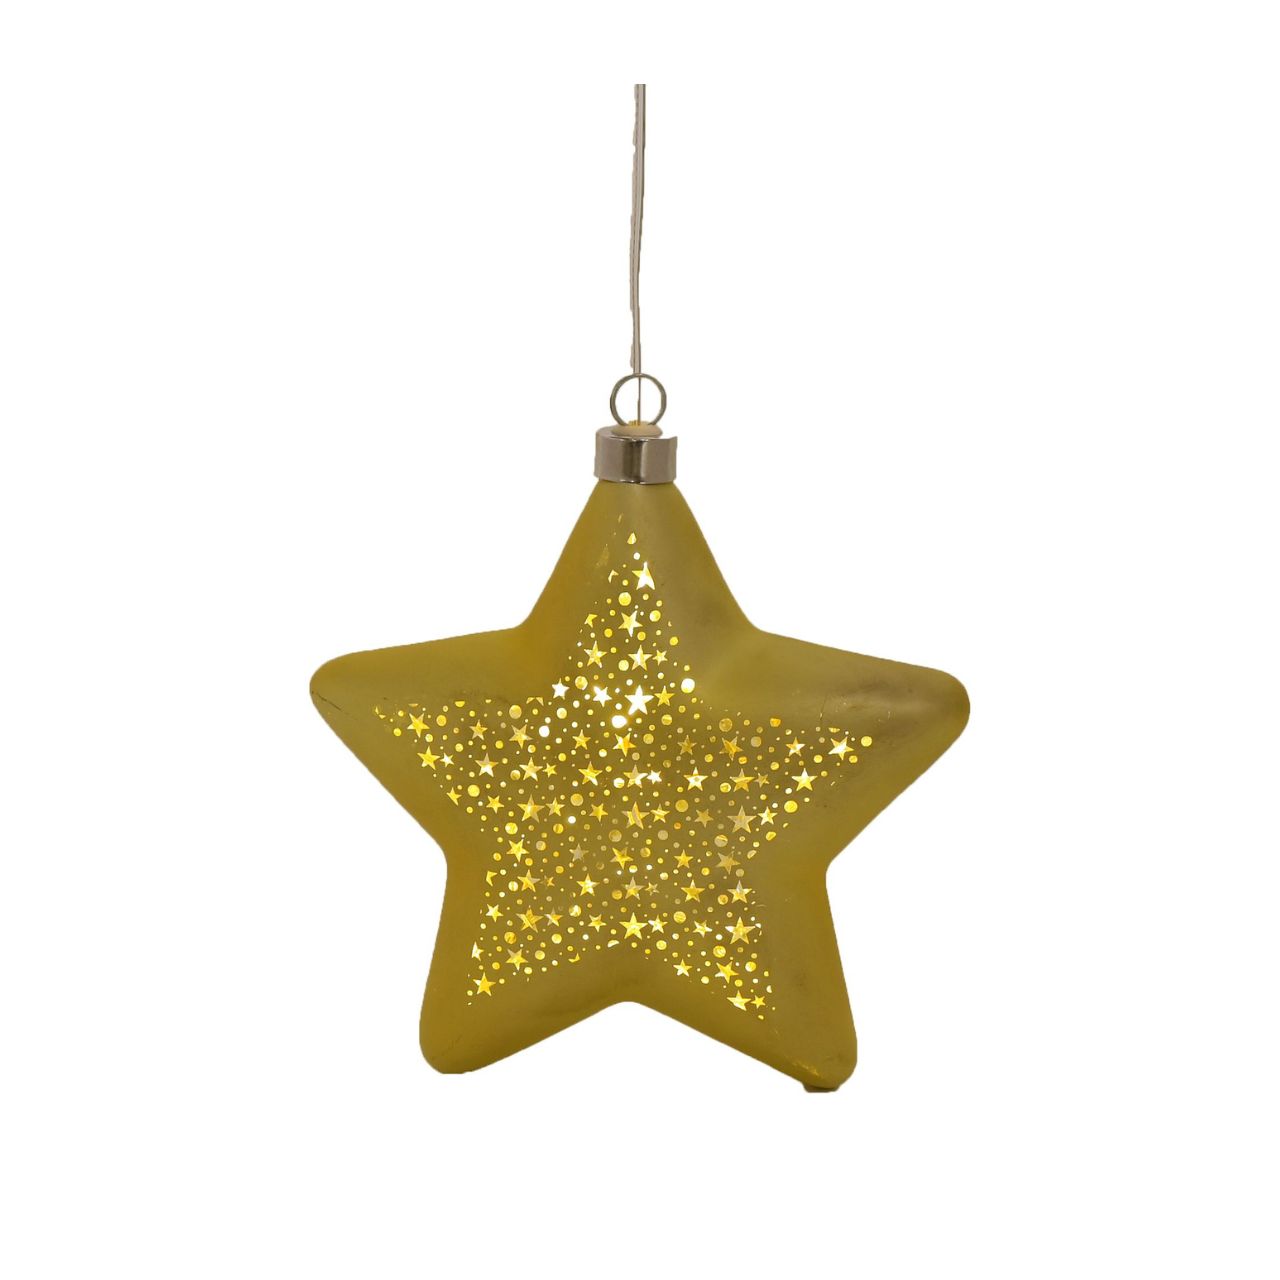 Celestial Gold Star LED Hanging Light Decoration  A celestial gold star LED hanging light decoration.  This celestial decoration takes inspiration from the stars as it shines brightly for all to admire.